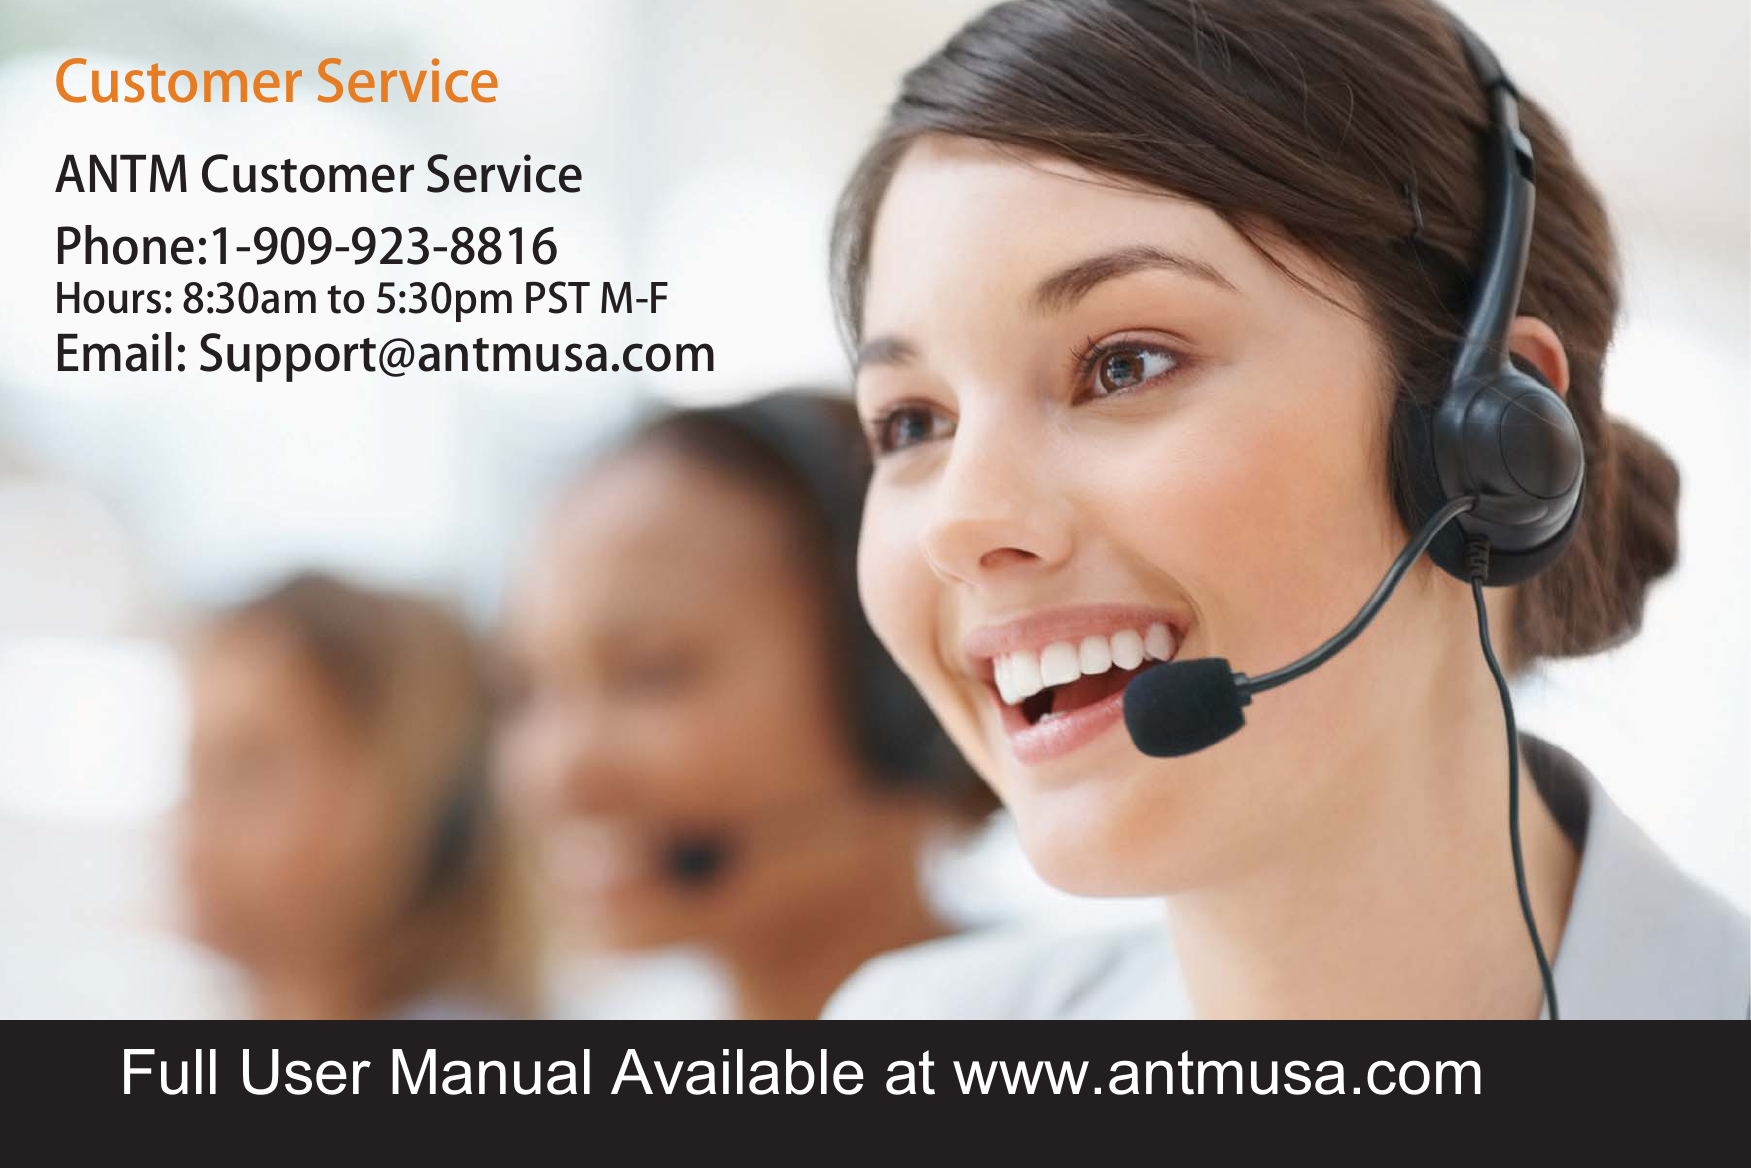 ANTM Customer ServicePhone:1-909-923-8816 Hours: 8:30am to 5:30pm PST M-FEmail: Support@antmusa.com Customer ServiceFull User Manual Available at www.antmusa.com